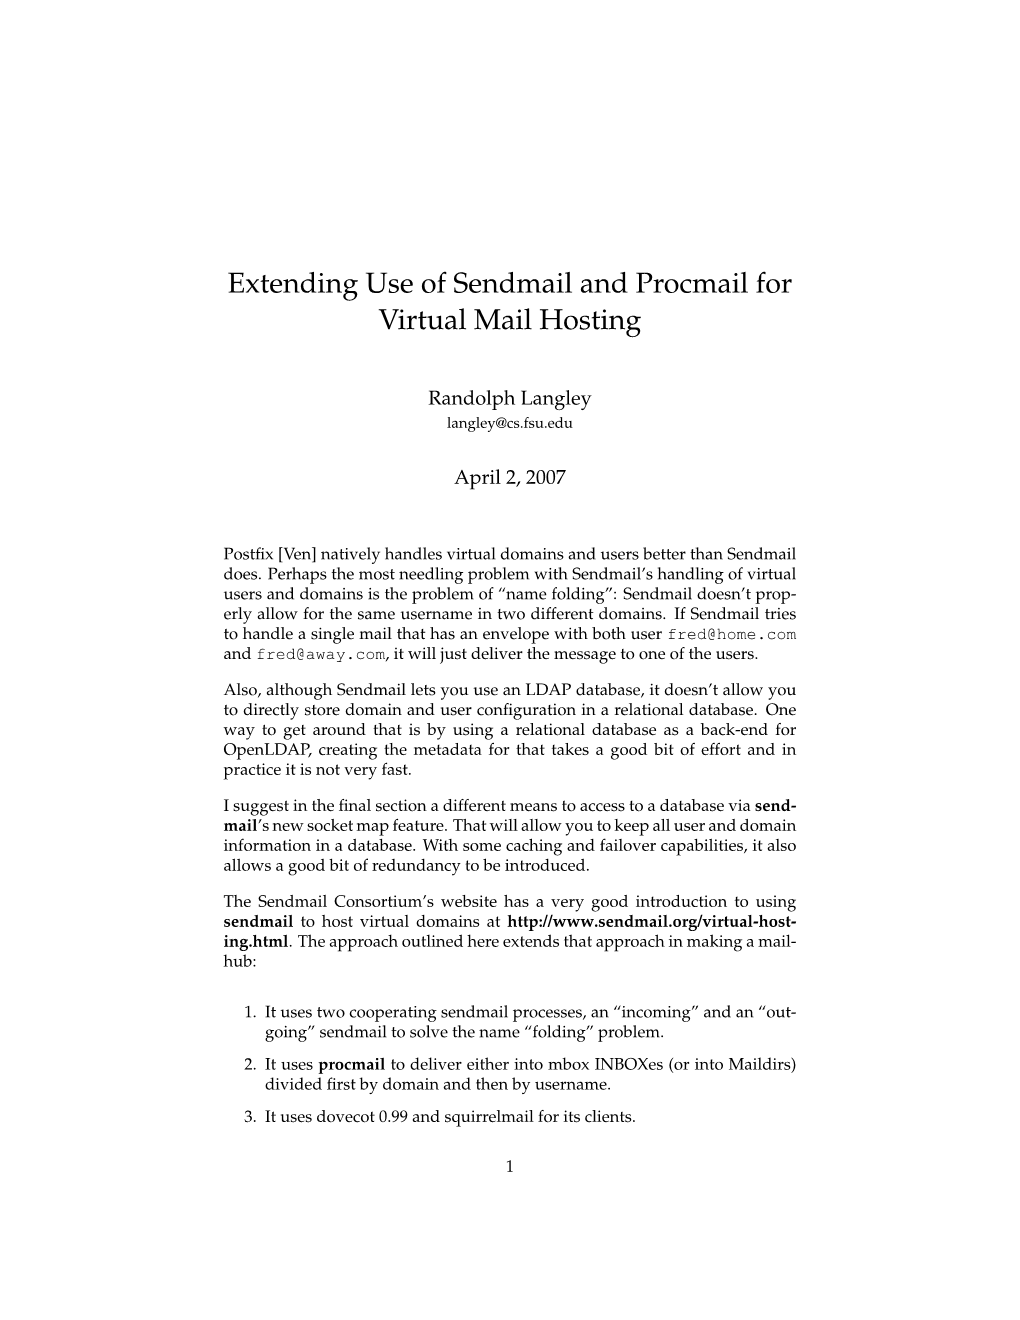 Extending Use of Sendmail and Procmail for Virtual Mail Hosting